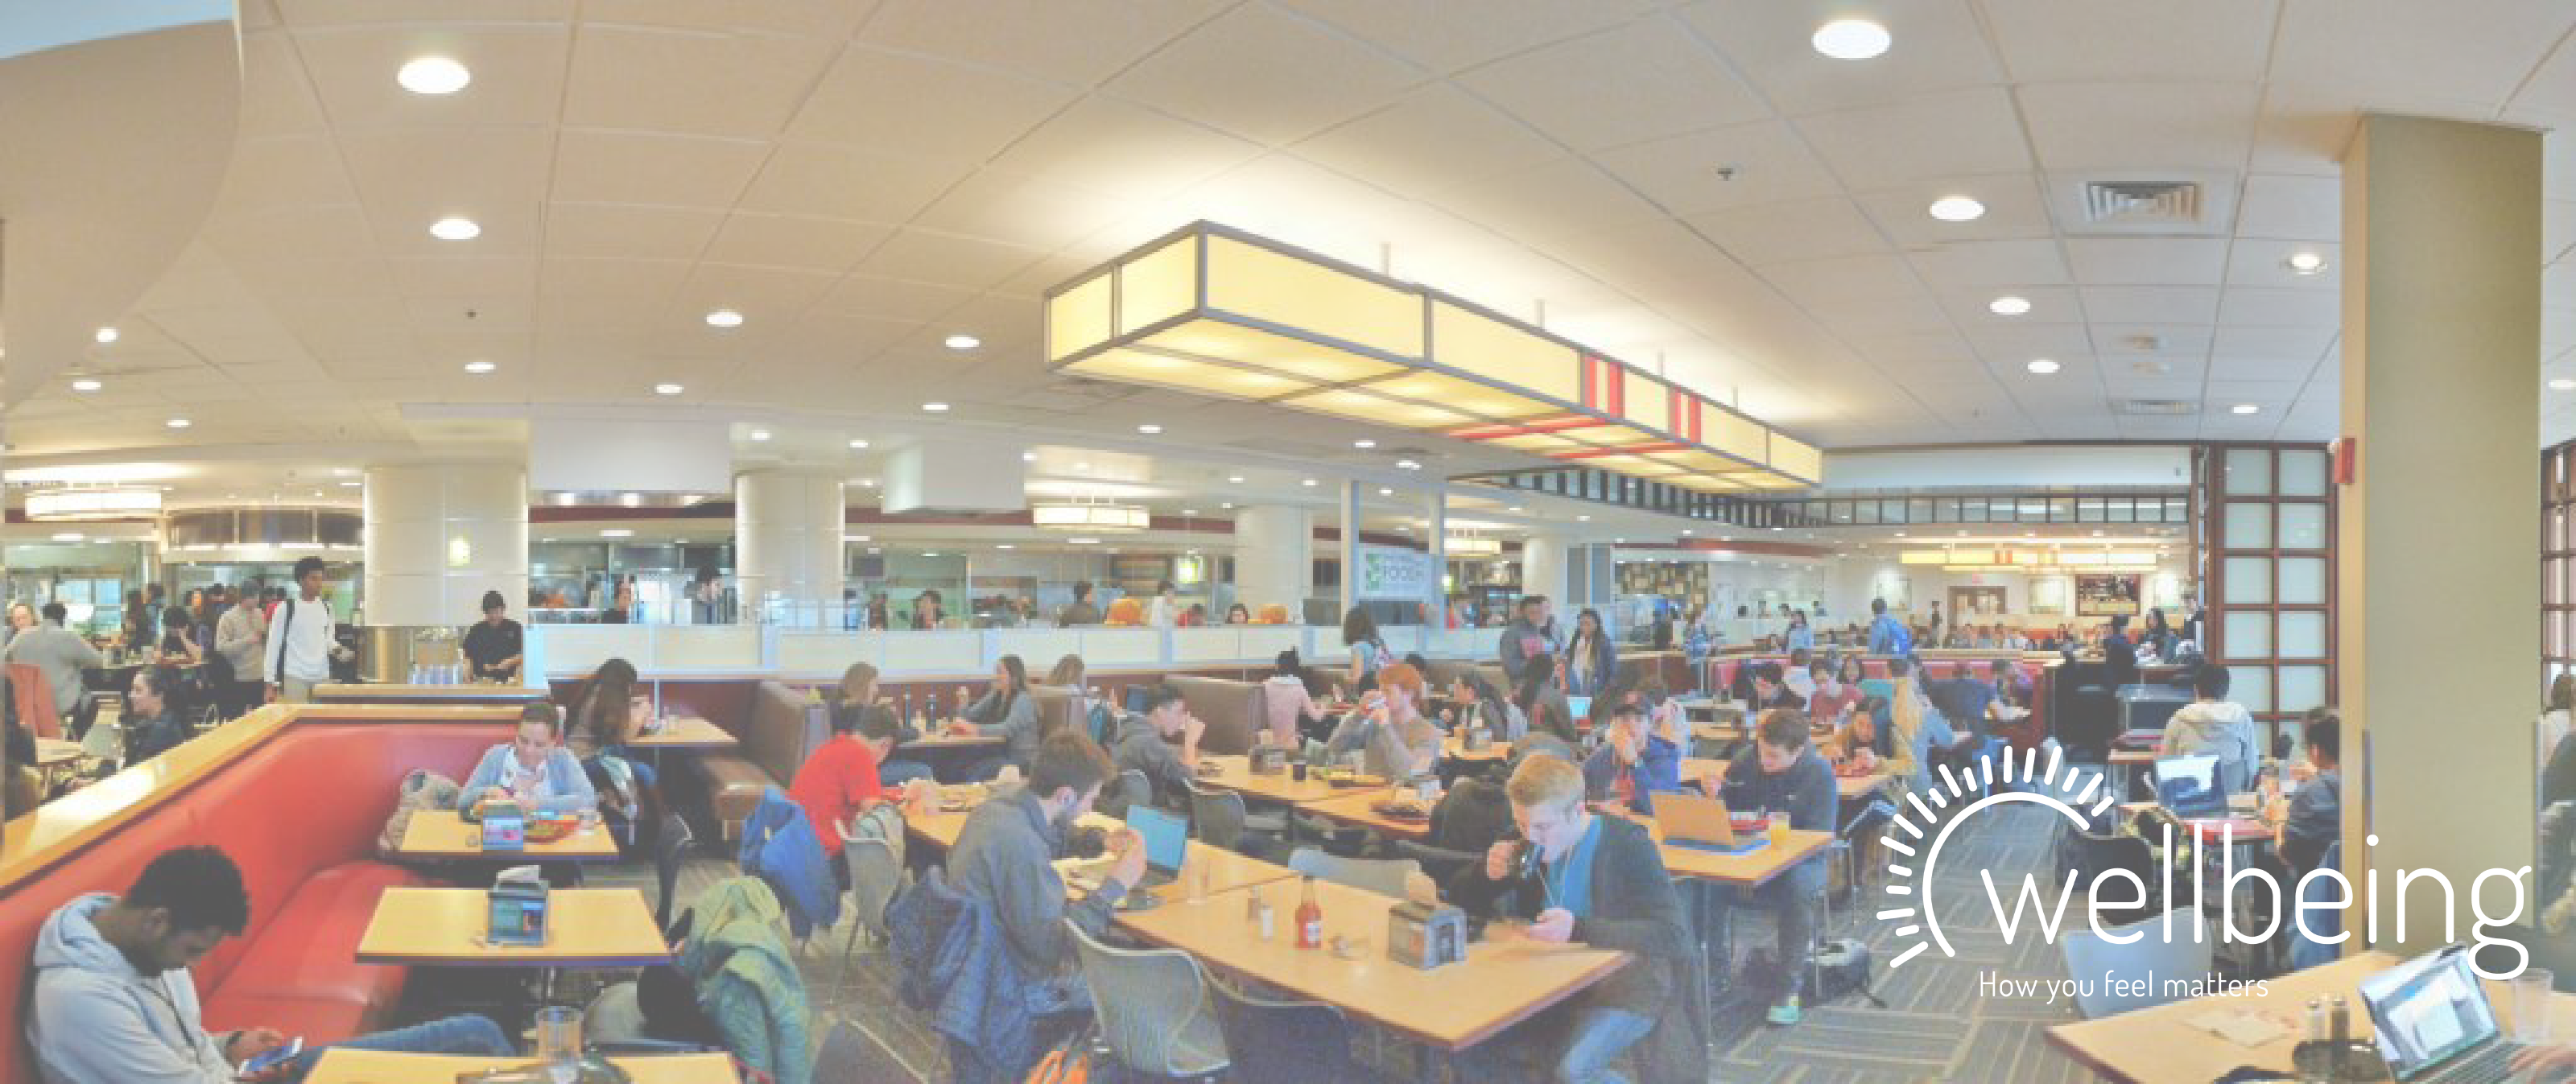 Warren Towers Dining Hall